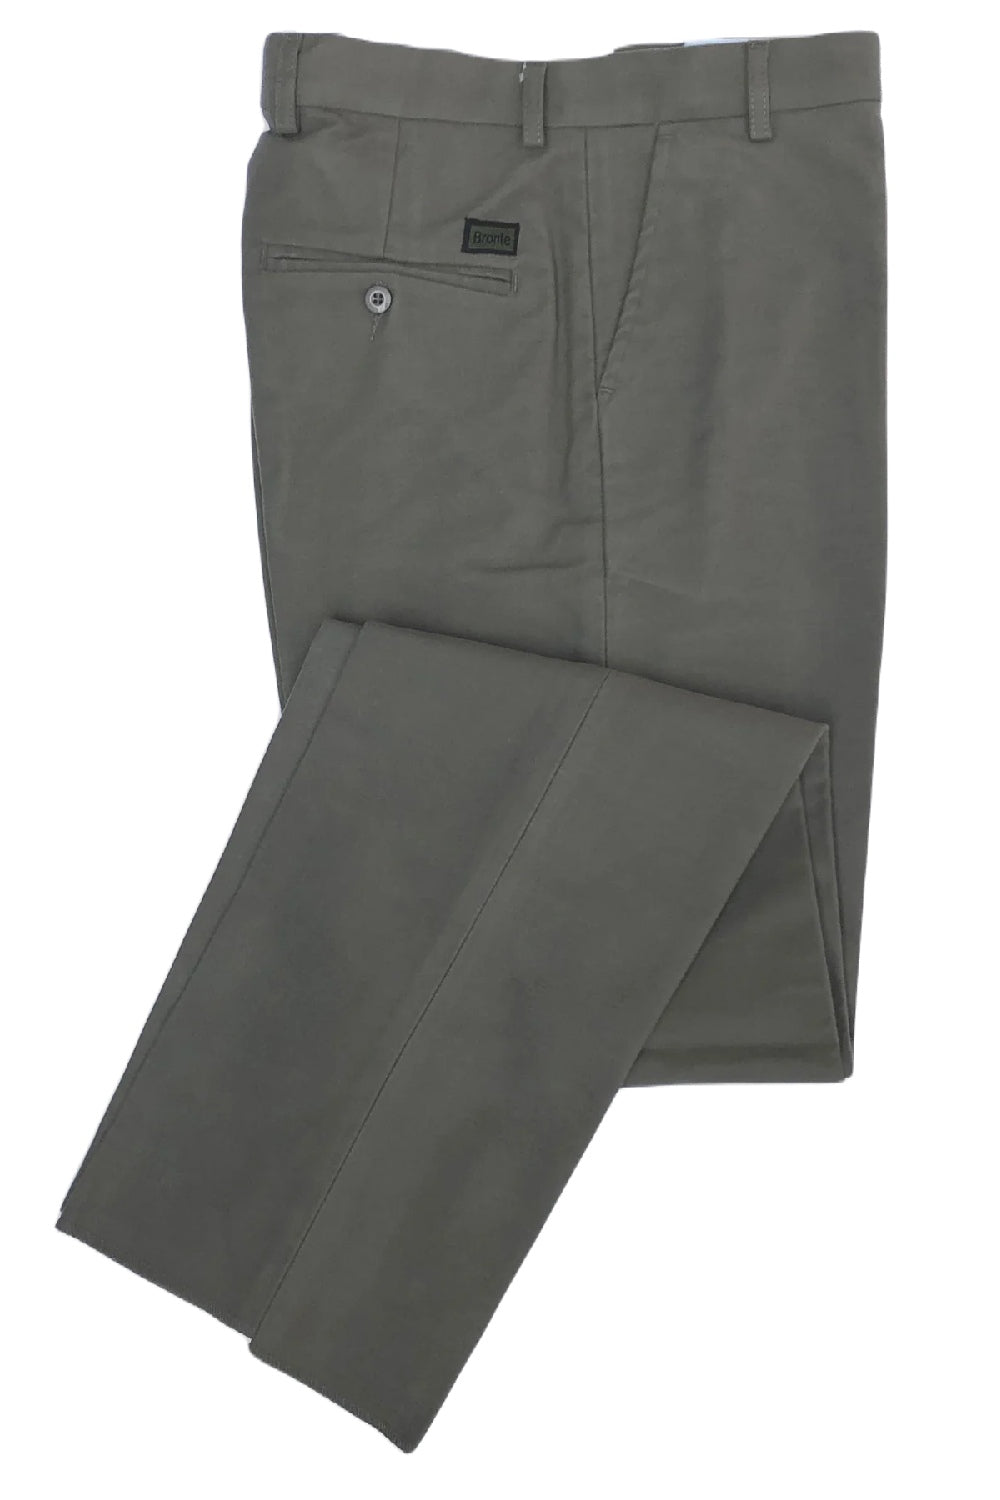 Tailored Moleskin Trousers  Charcoal Grey Chinos  Tails   tailsandtheunexpected